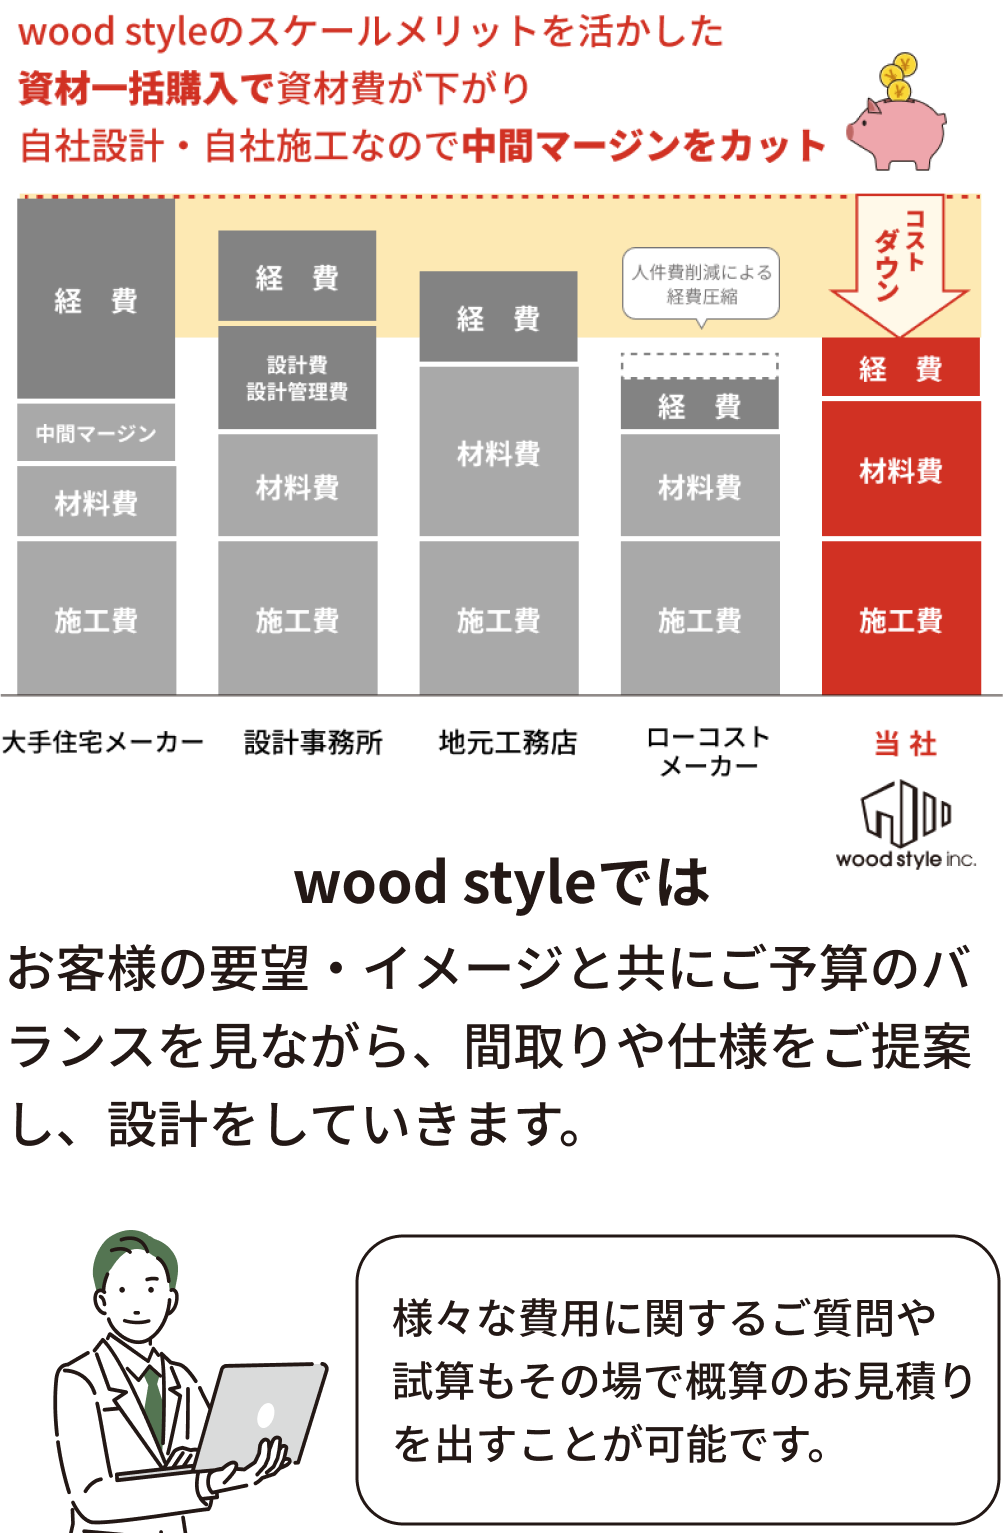 wood styleのスケールメリットを活かした資材一括購入で
資材費が下がり、自社設計・自社施工なので中間マージンをカット